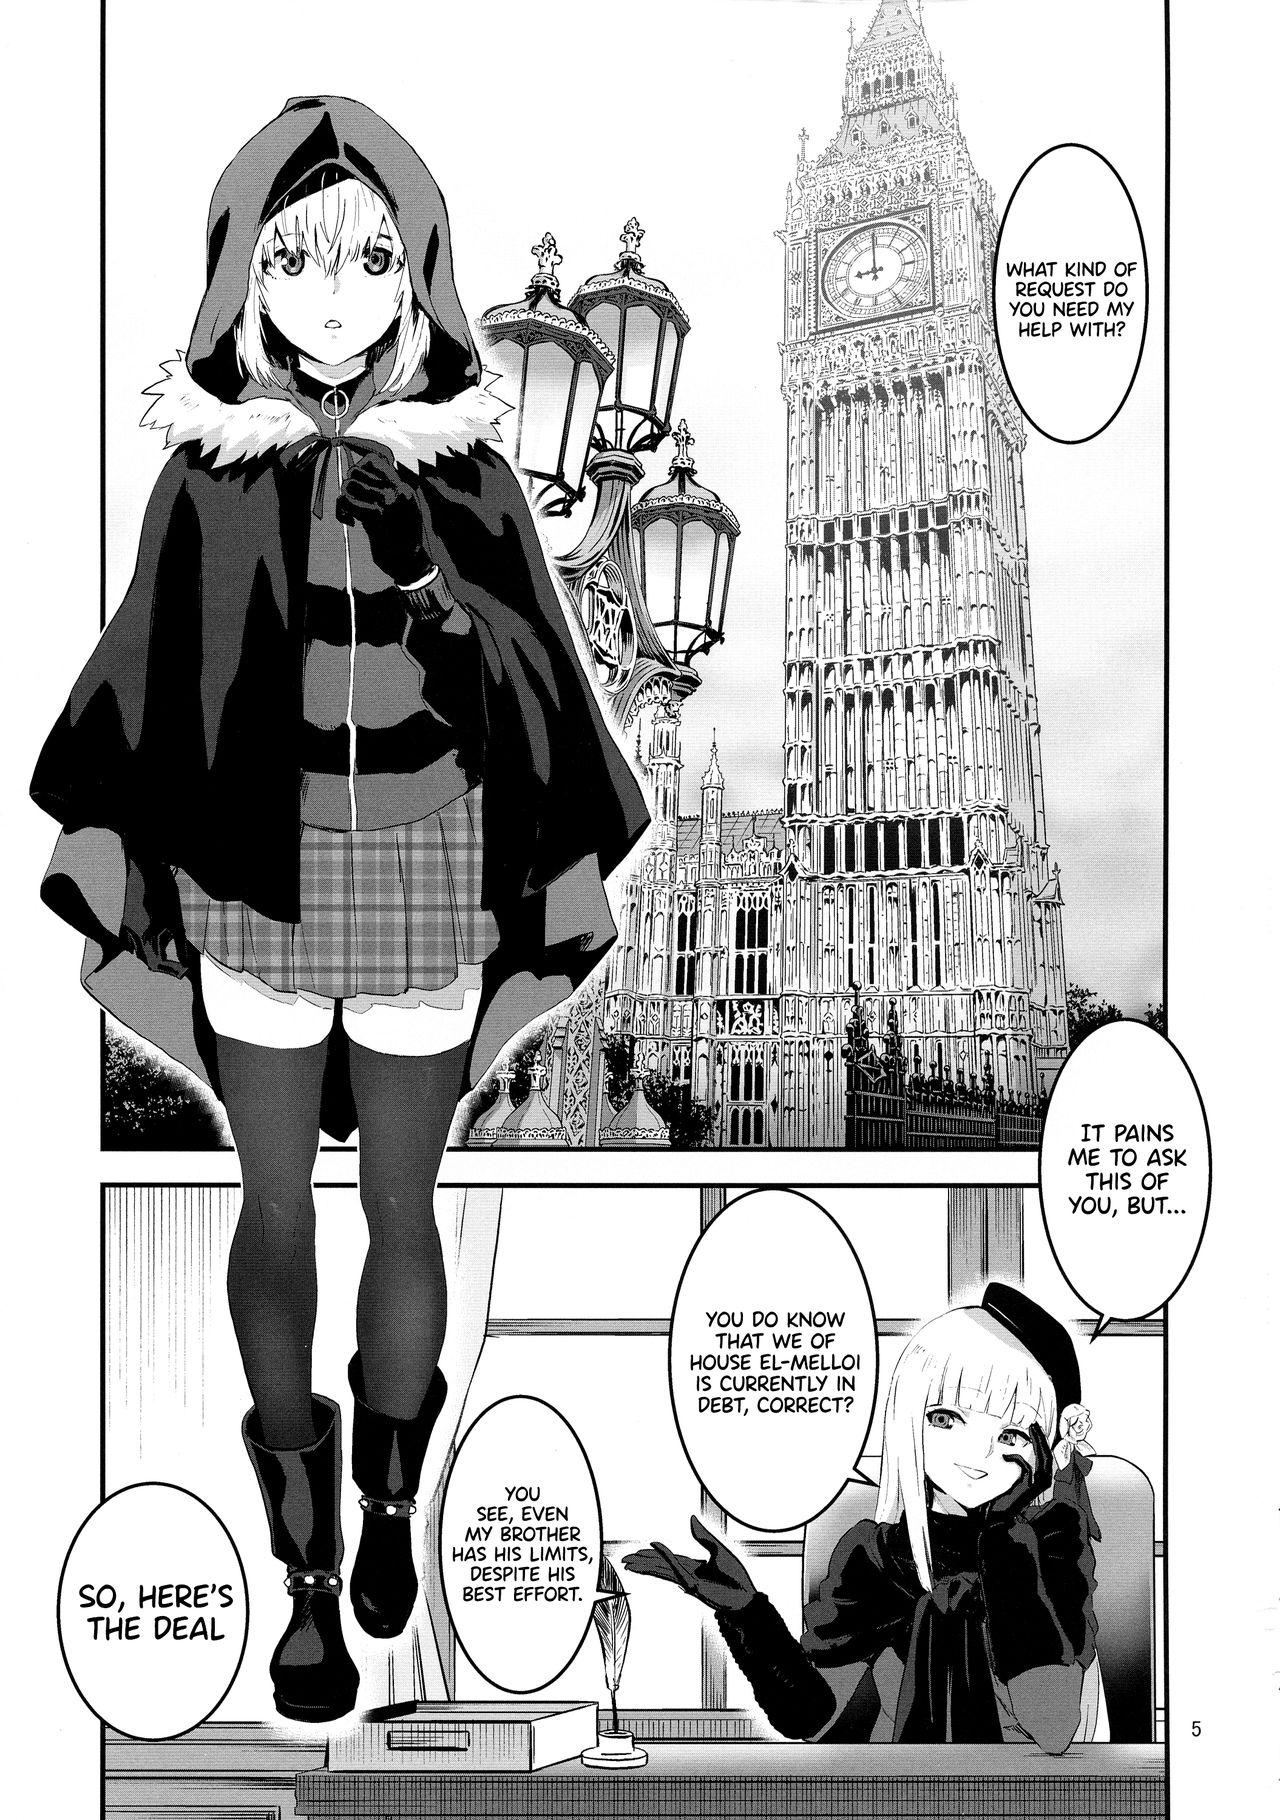 Cumfacial Taking Advantage of Gray-chan Weakness, We Graduated from our Virginity. - Lord el-melloi ii sei no jikenbo Leather - Page 5